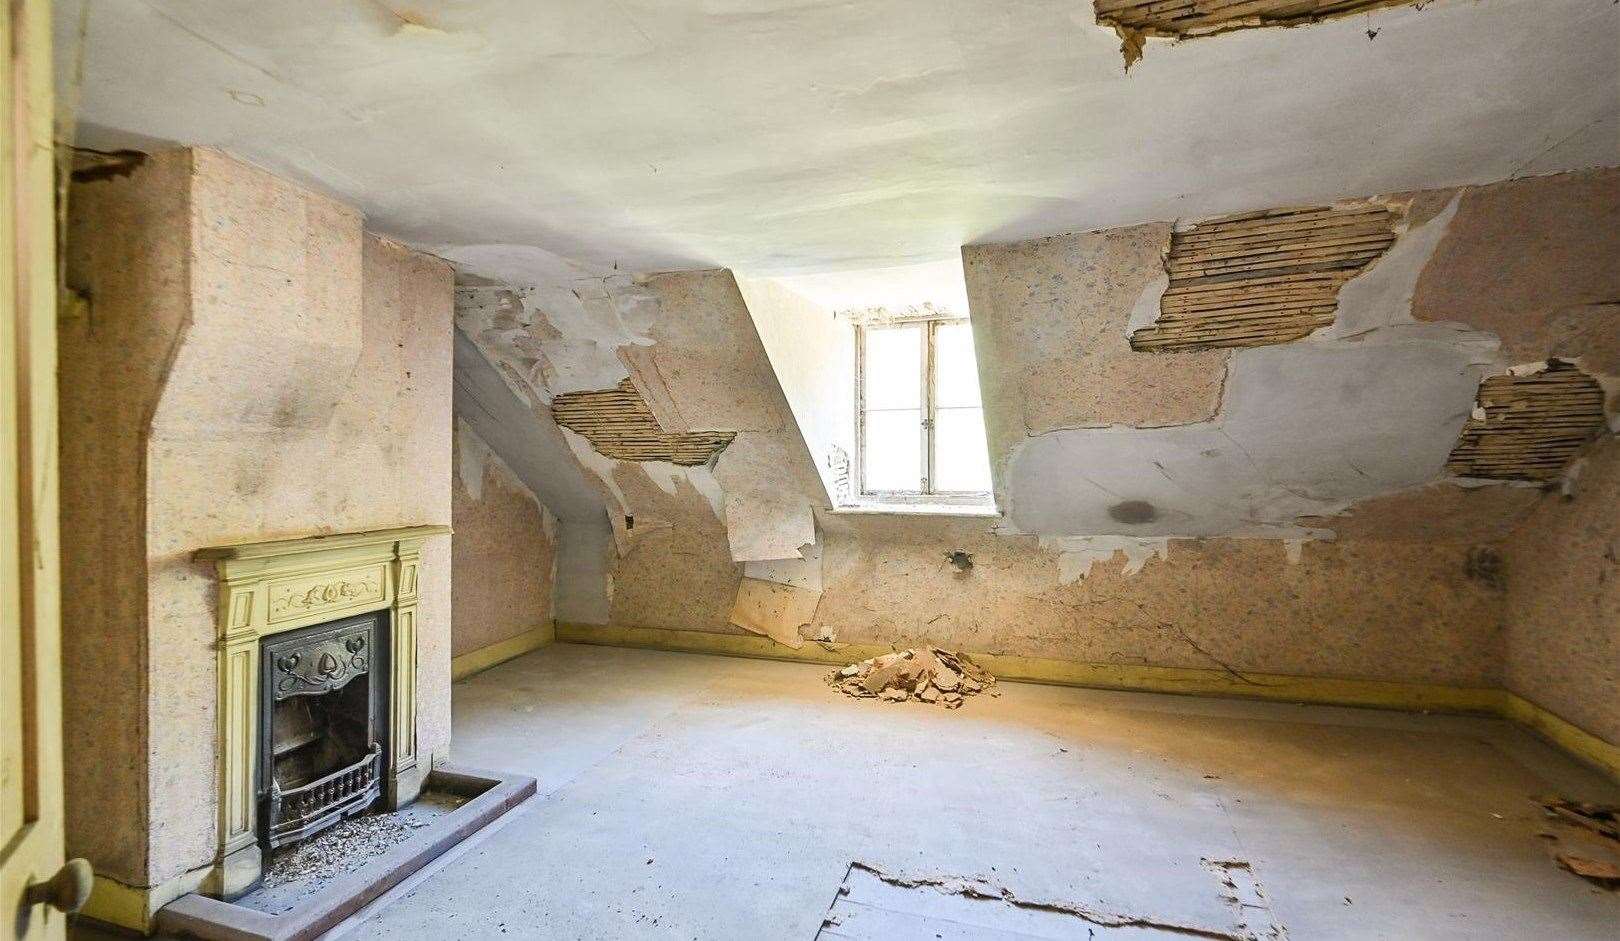 The rooms have a faded elegance, ripe for restoration